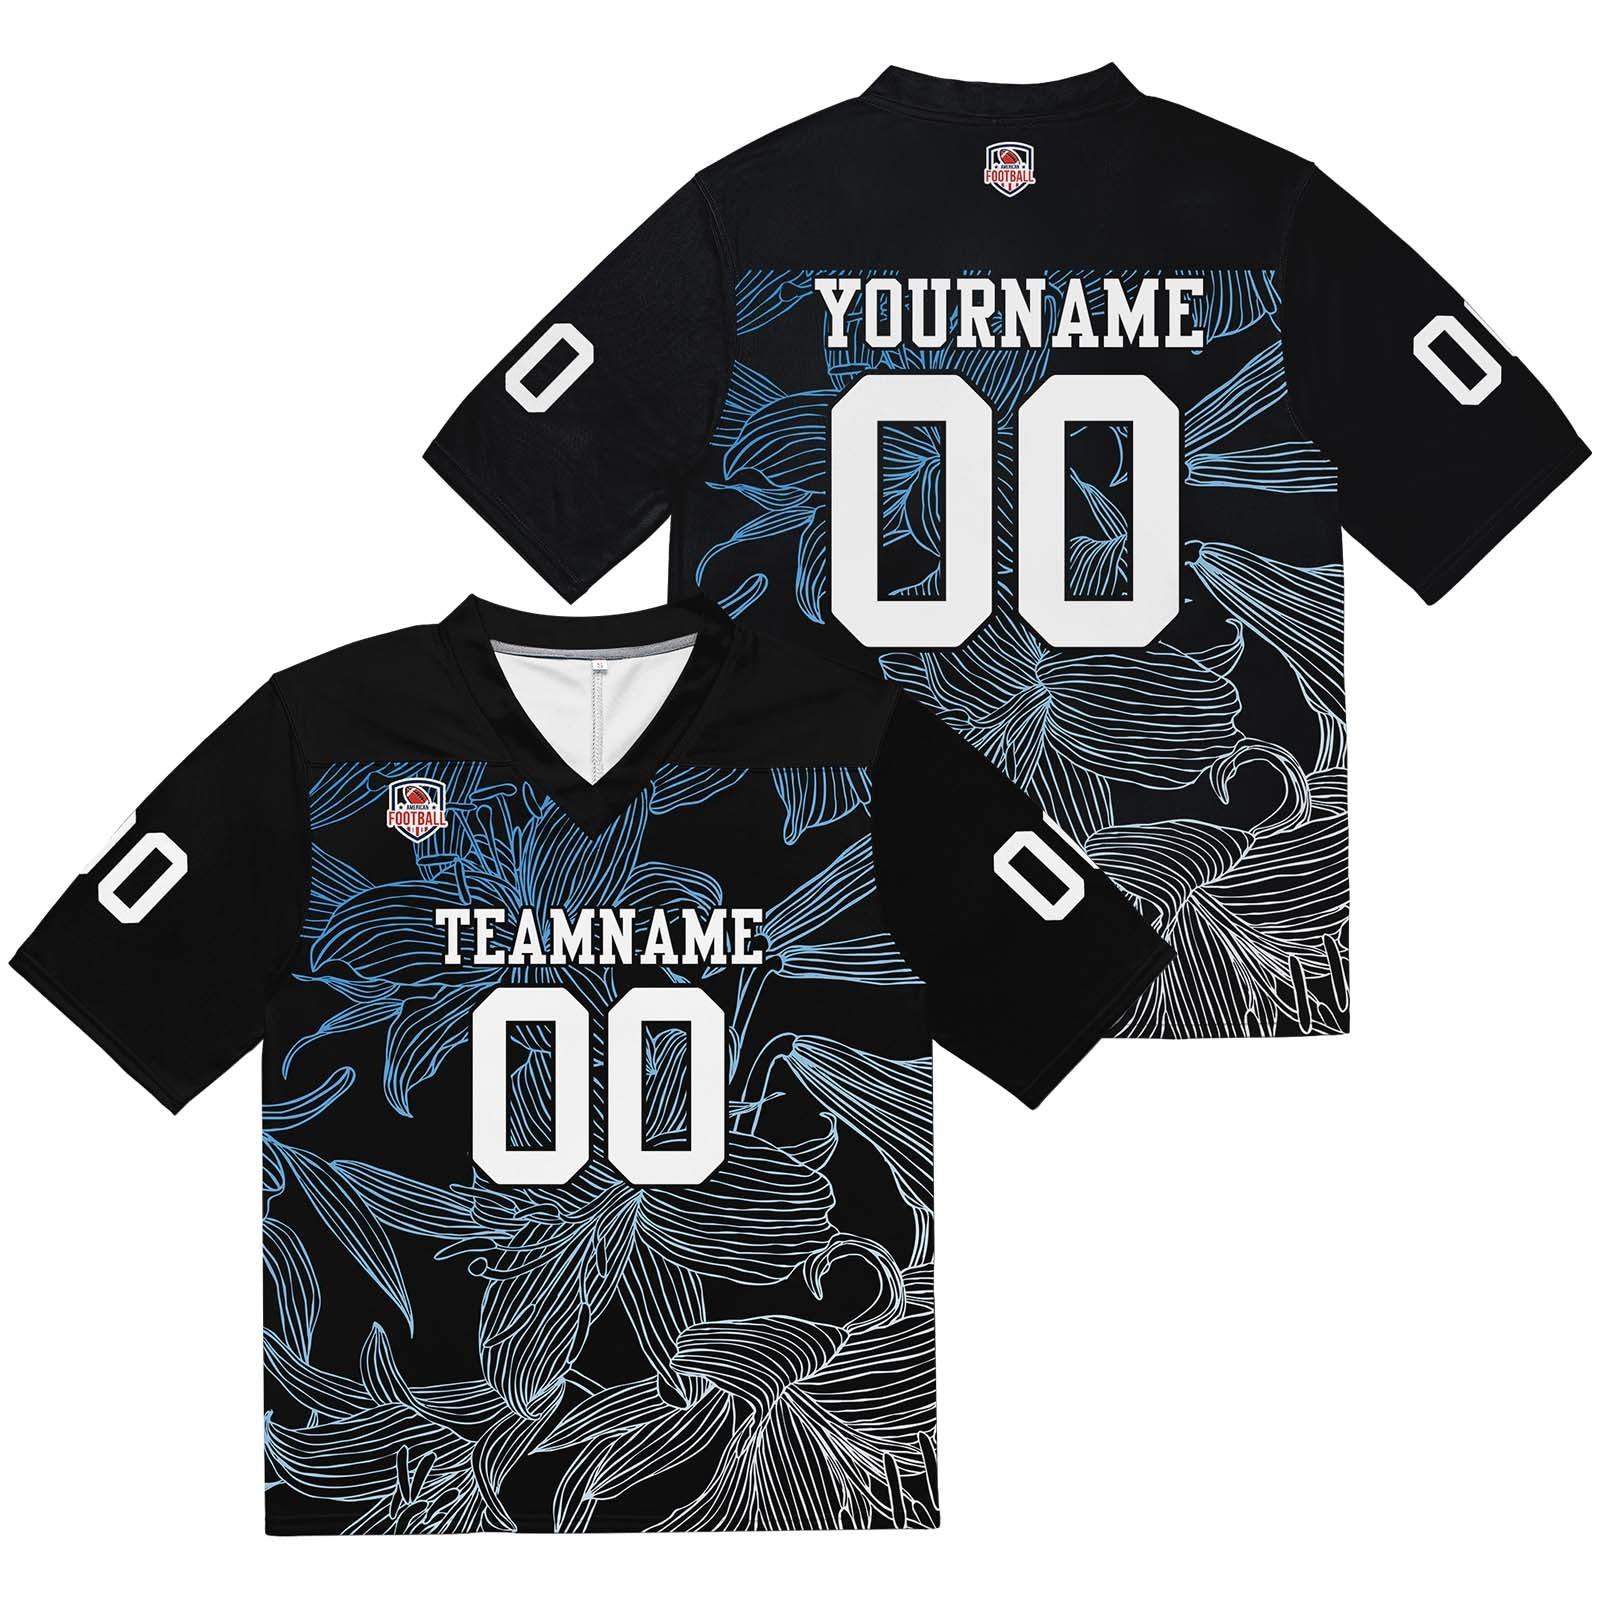 Custom Football Jersey Shirt Personalized Stitched Printed Team Name Number Blue white gradient